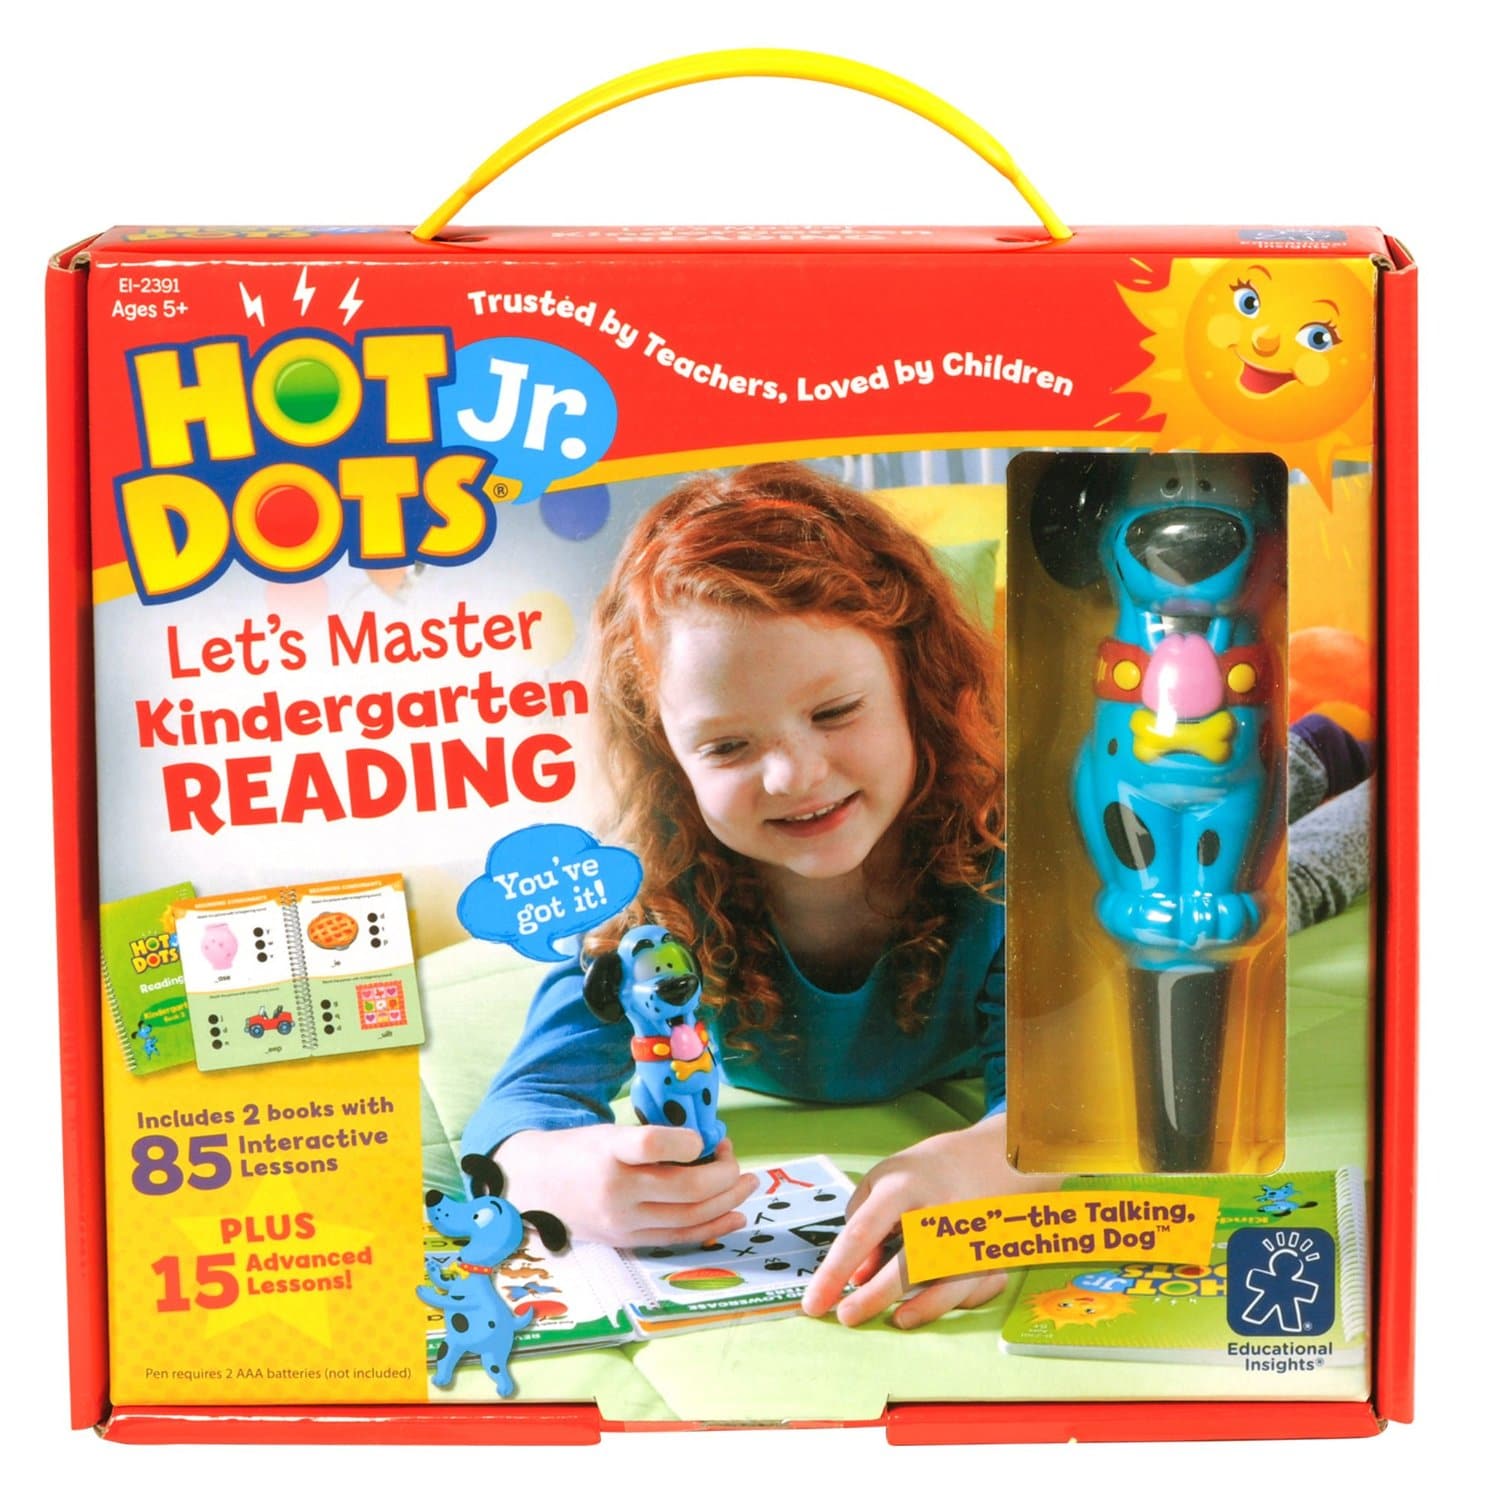 Hot Dots Jr. is a fun, self-correcting activity for kids that they will want to play over and over!